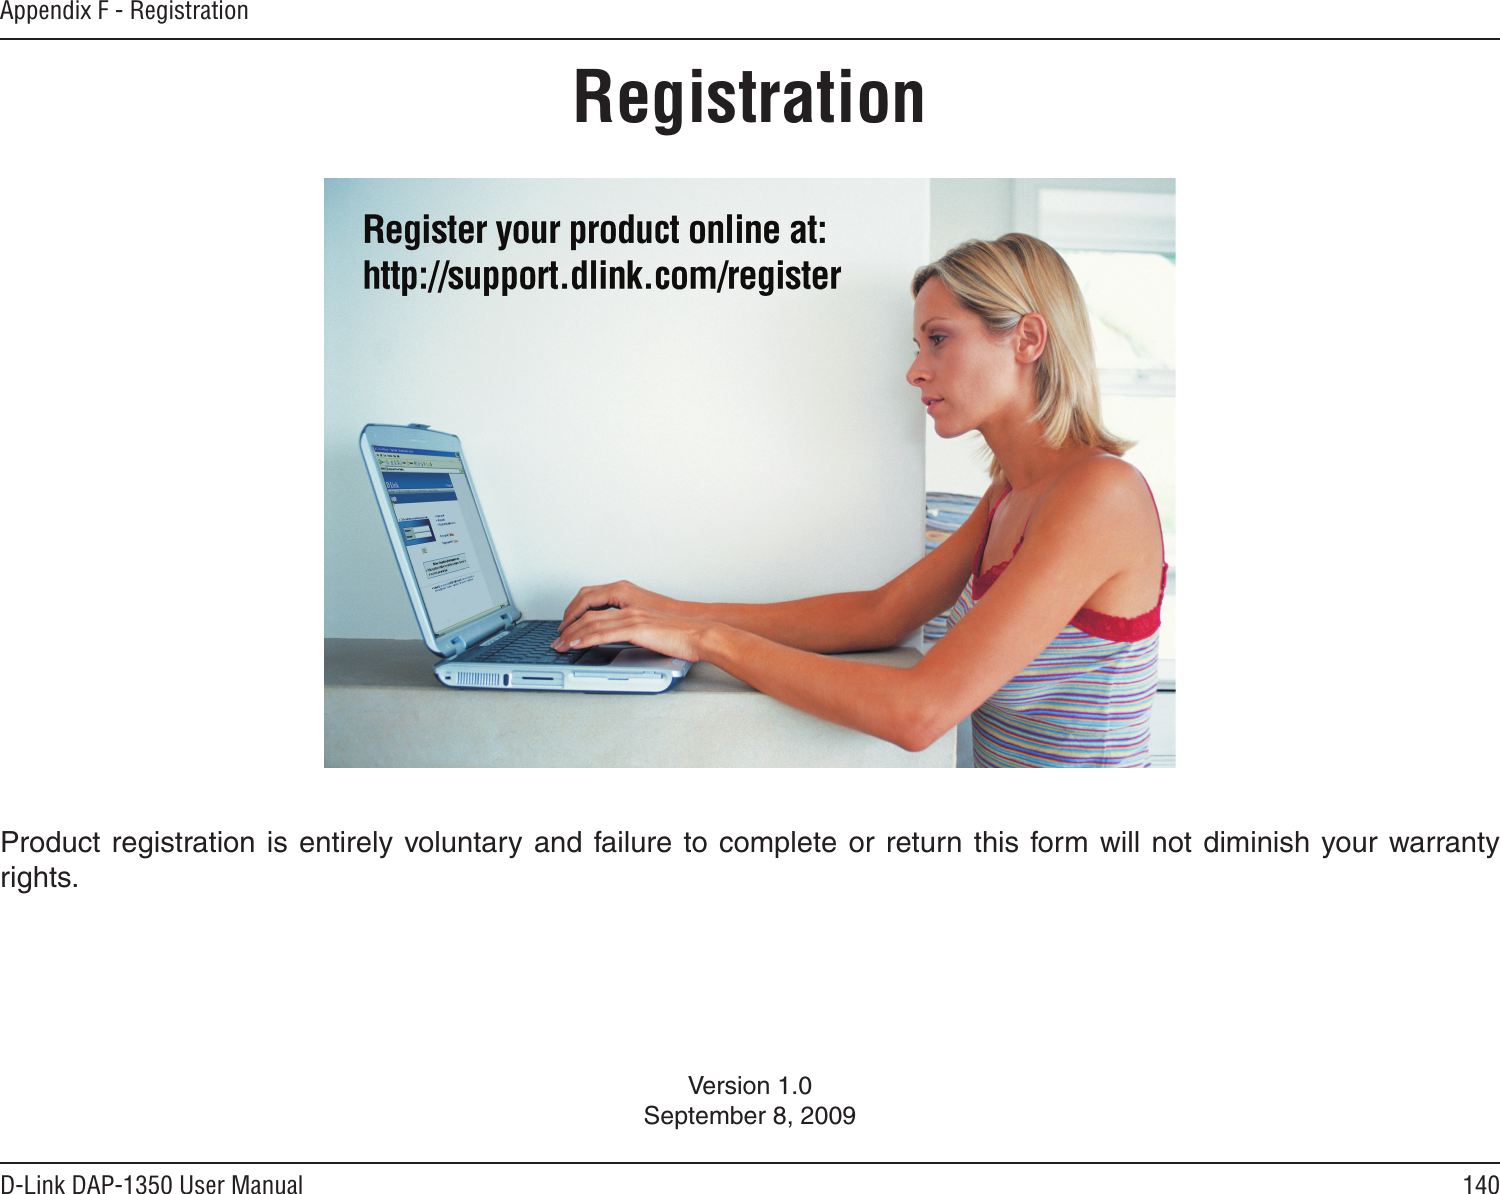 140D-Link DAP-1350 User ManualAppendix F - RegistrationVersion 1.0September 8, 2009Product registration is entirely voluntary and failure  to  complete  or  return this form will not diminish your warranty rights.Registration